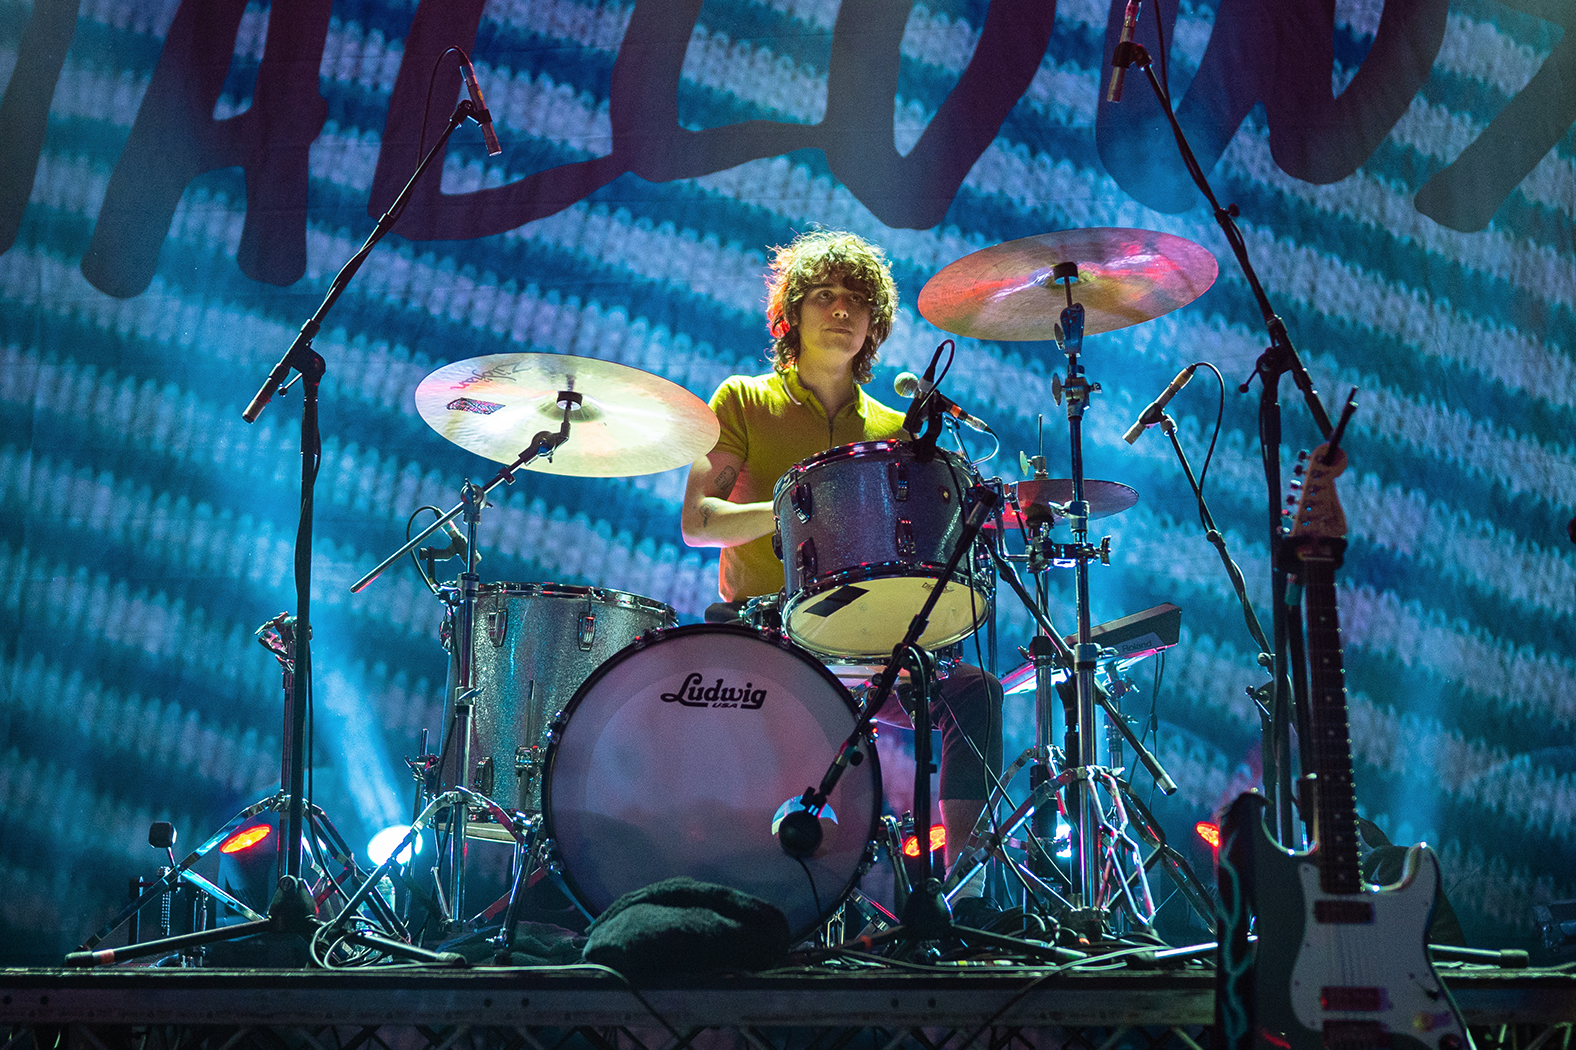 Wallows - Electric Brixton - 06_06_19 - Milly McAlister 5.jpg